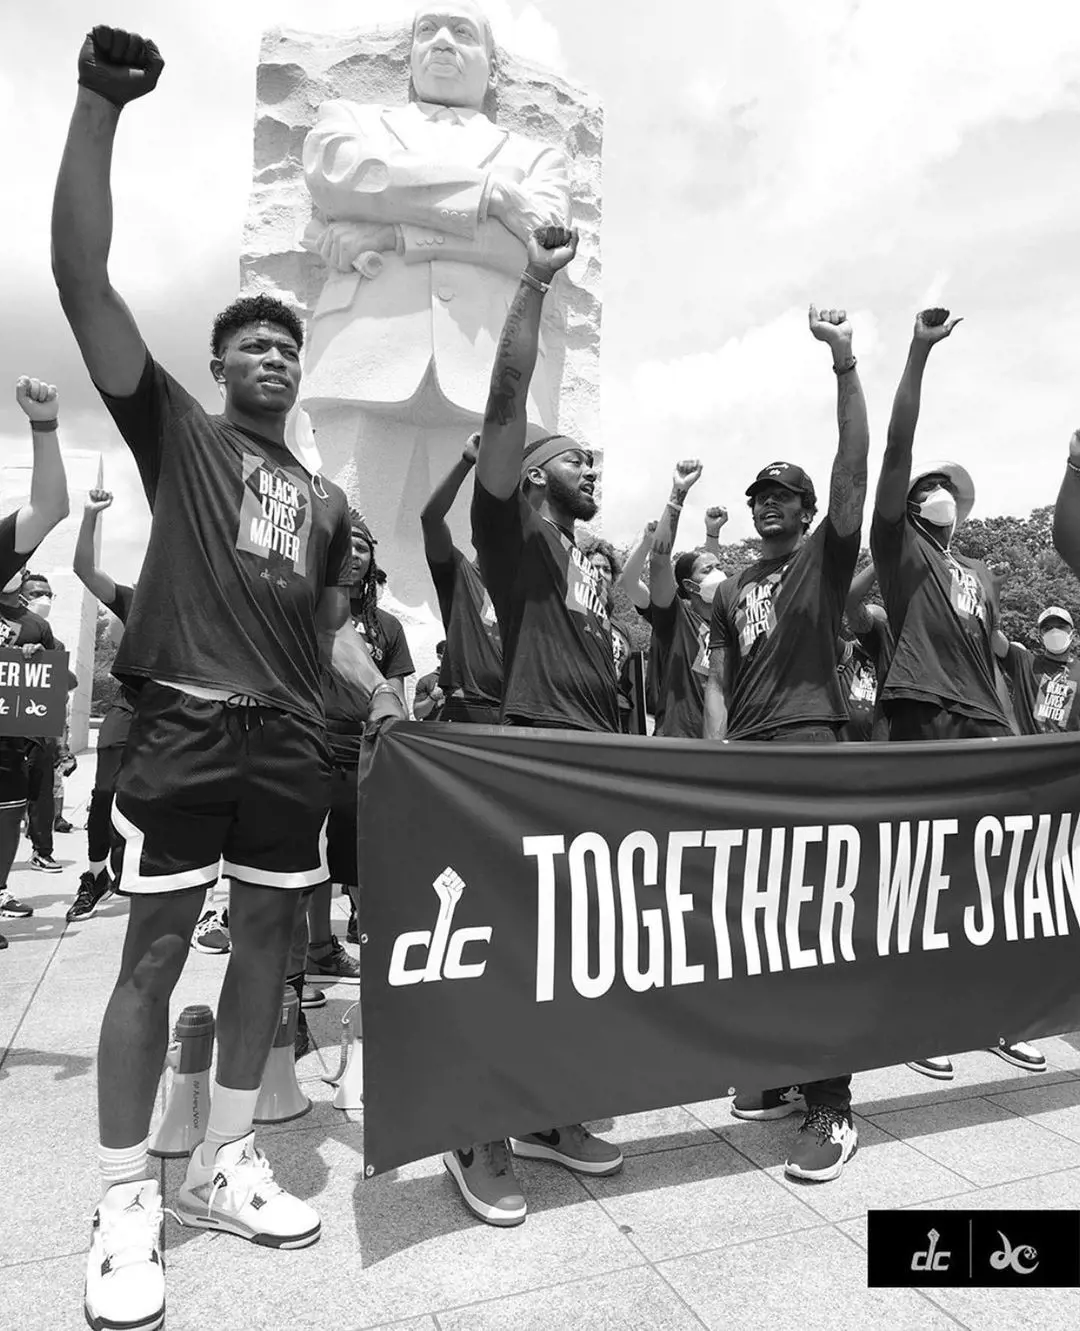 Rui and his Wizards teammates had walked in the BLM movement in June 2020.